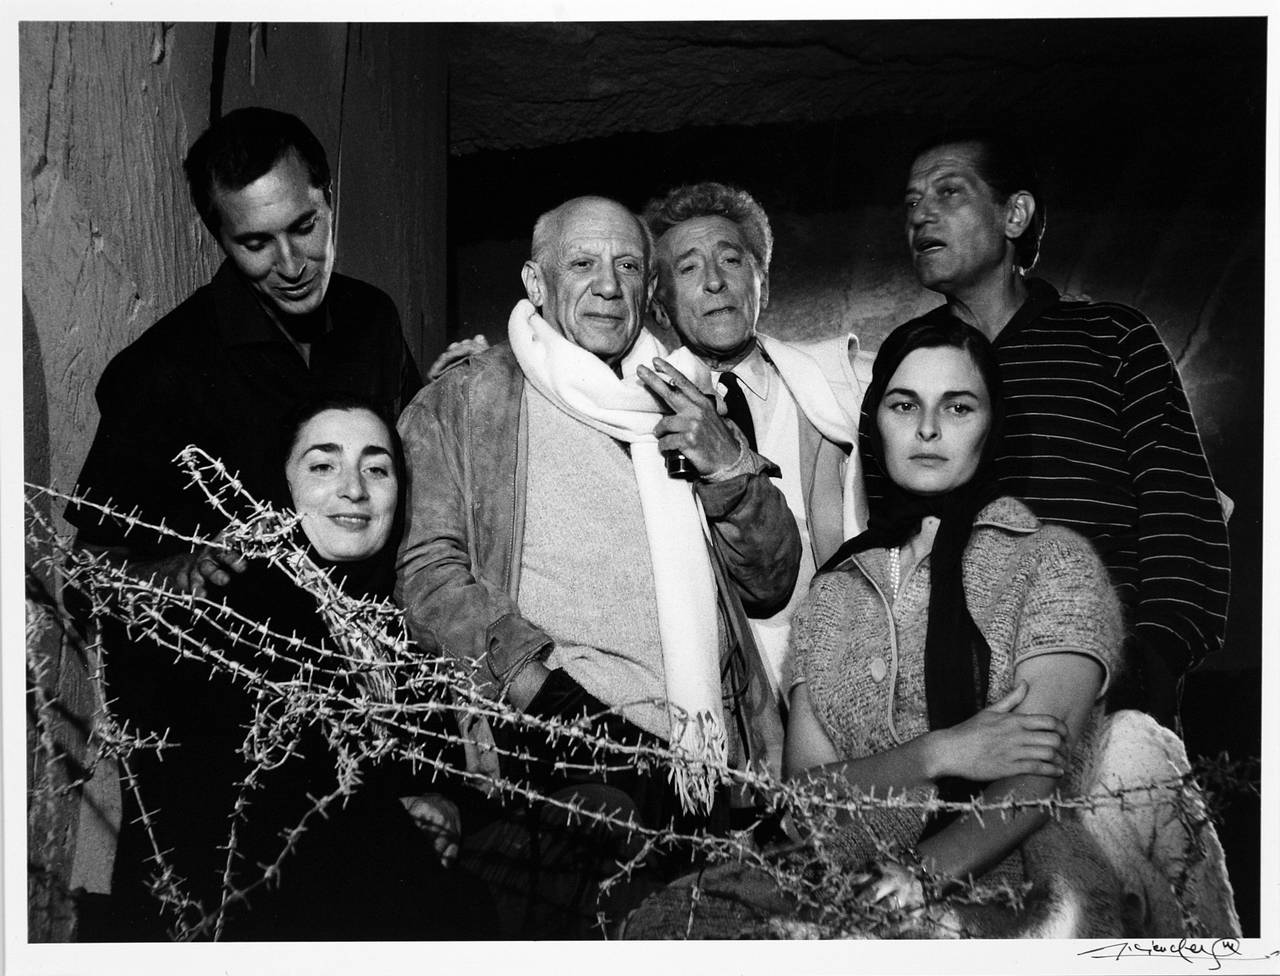 Lucien Clergue Portrait Photograph - Picasso with Friends and Family 1955